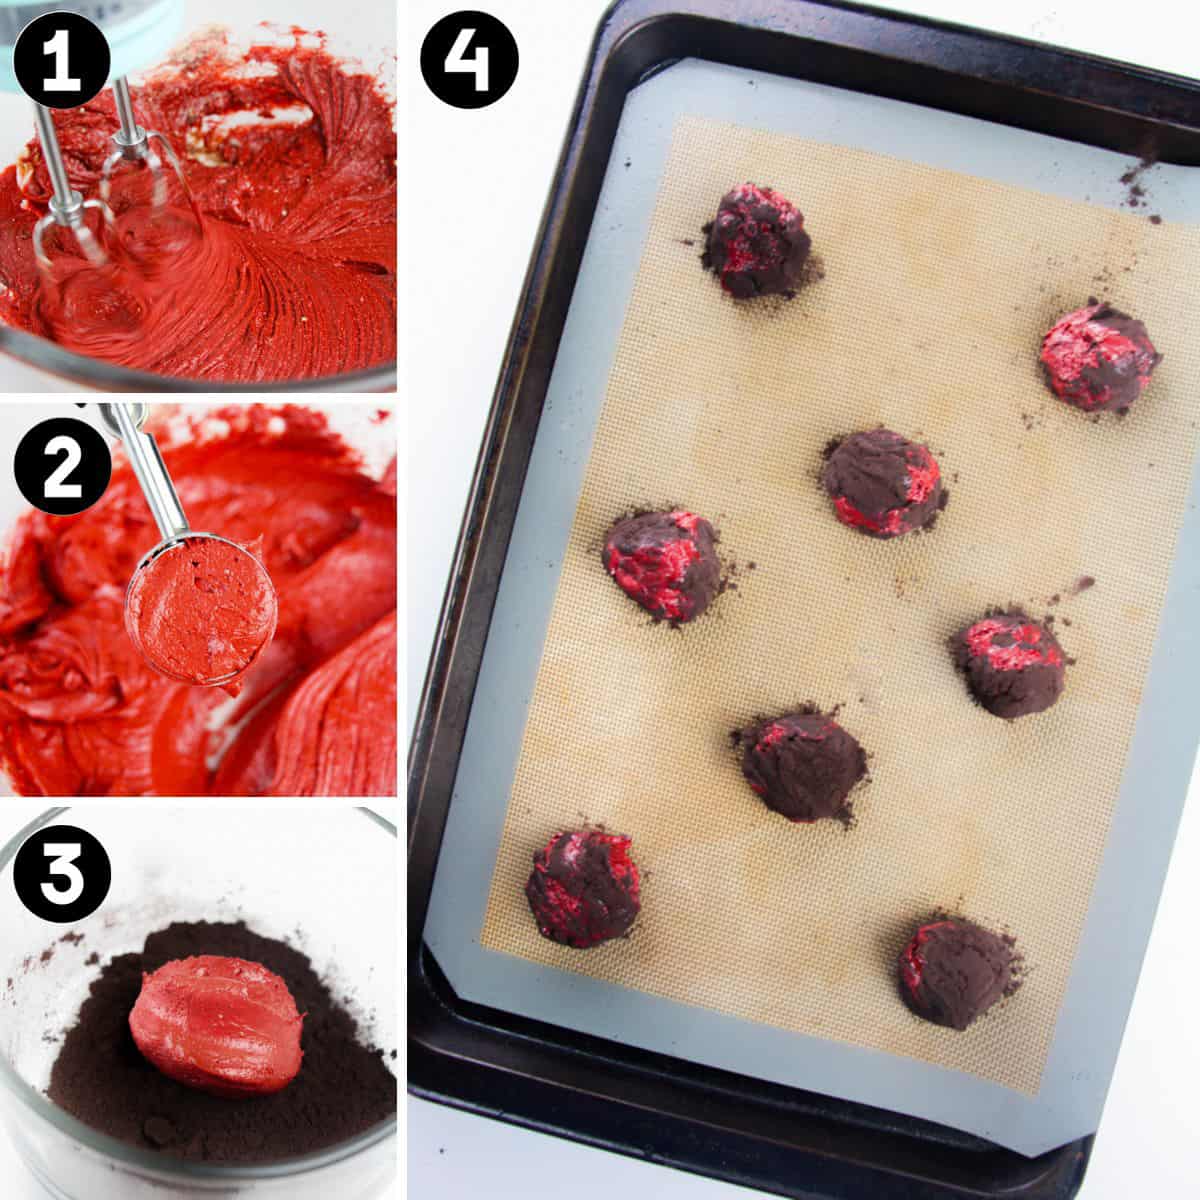 4 image collage of red cookie dough being mixed with electric beaters, cookie dough scoop portioning the dough, the dough being rolled in cocoa powder, and the cookie dough balls on a baking sheet.